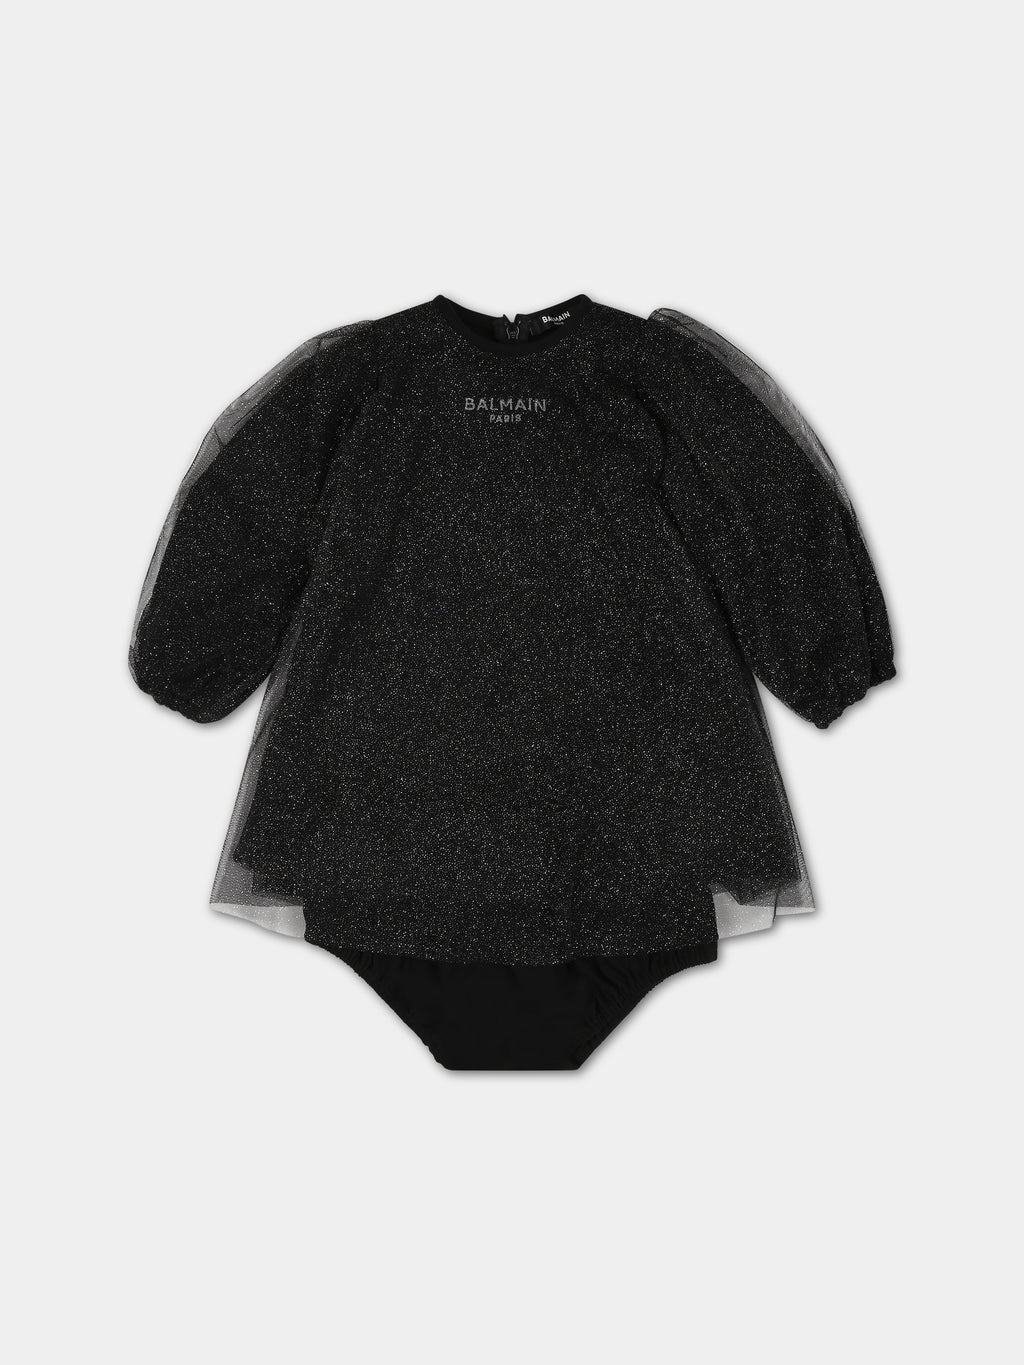 Black dress for baby girl with logo